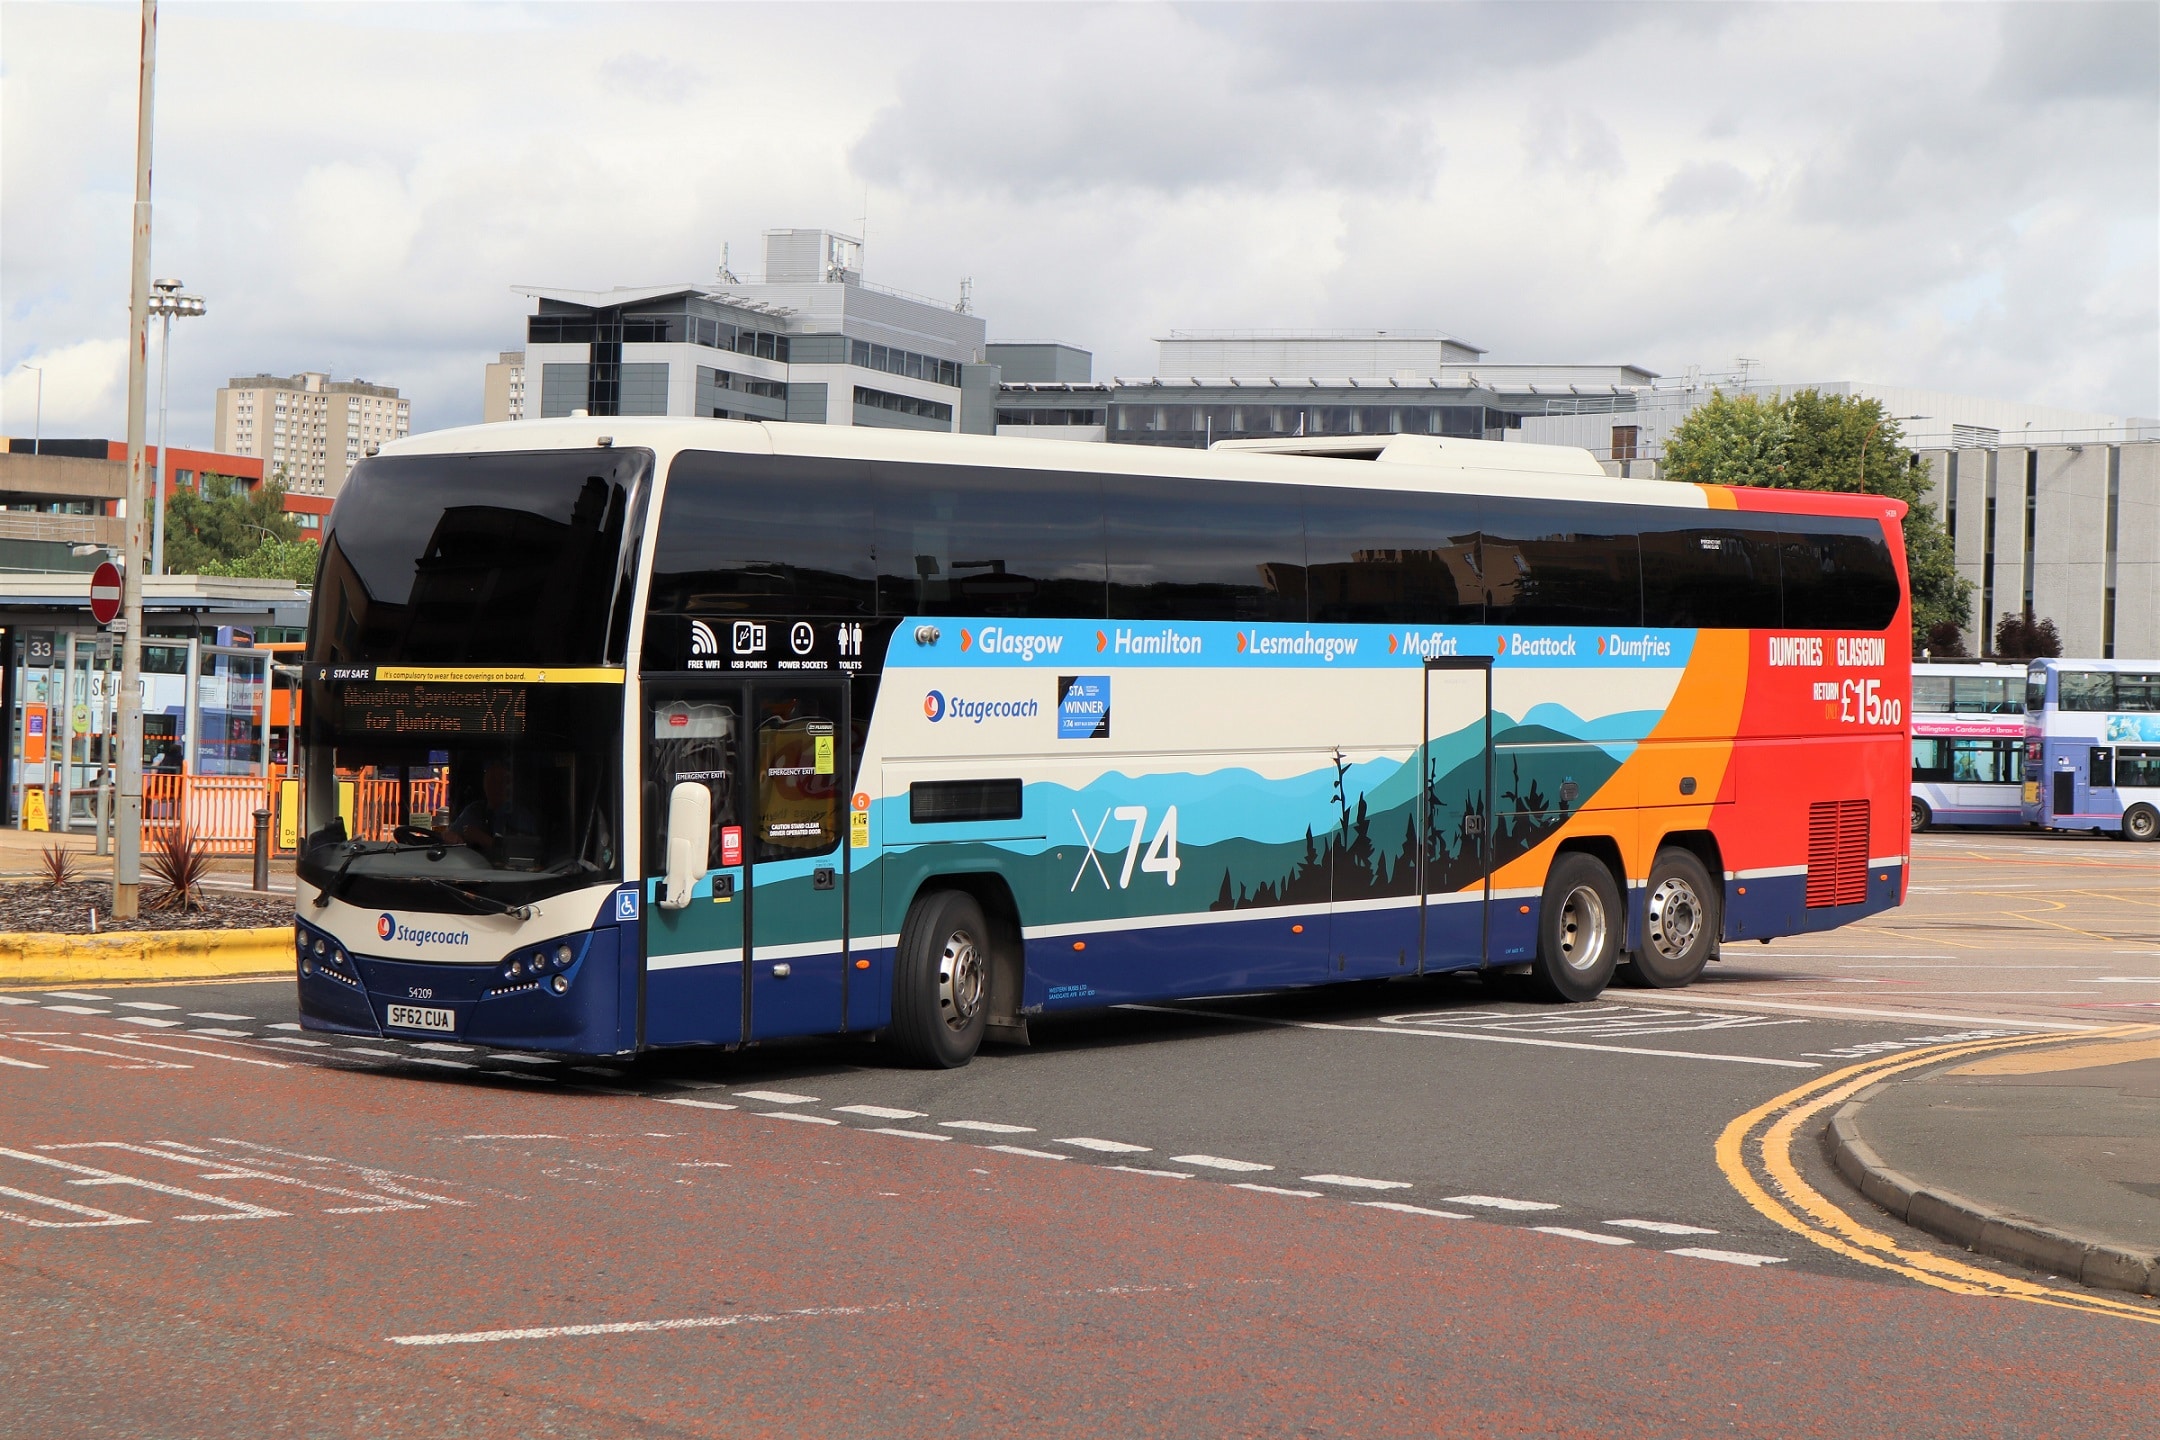 National Express confirms interest in bidding for Stagecoach